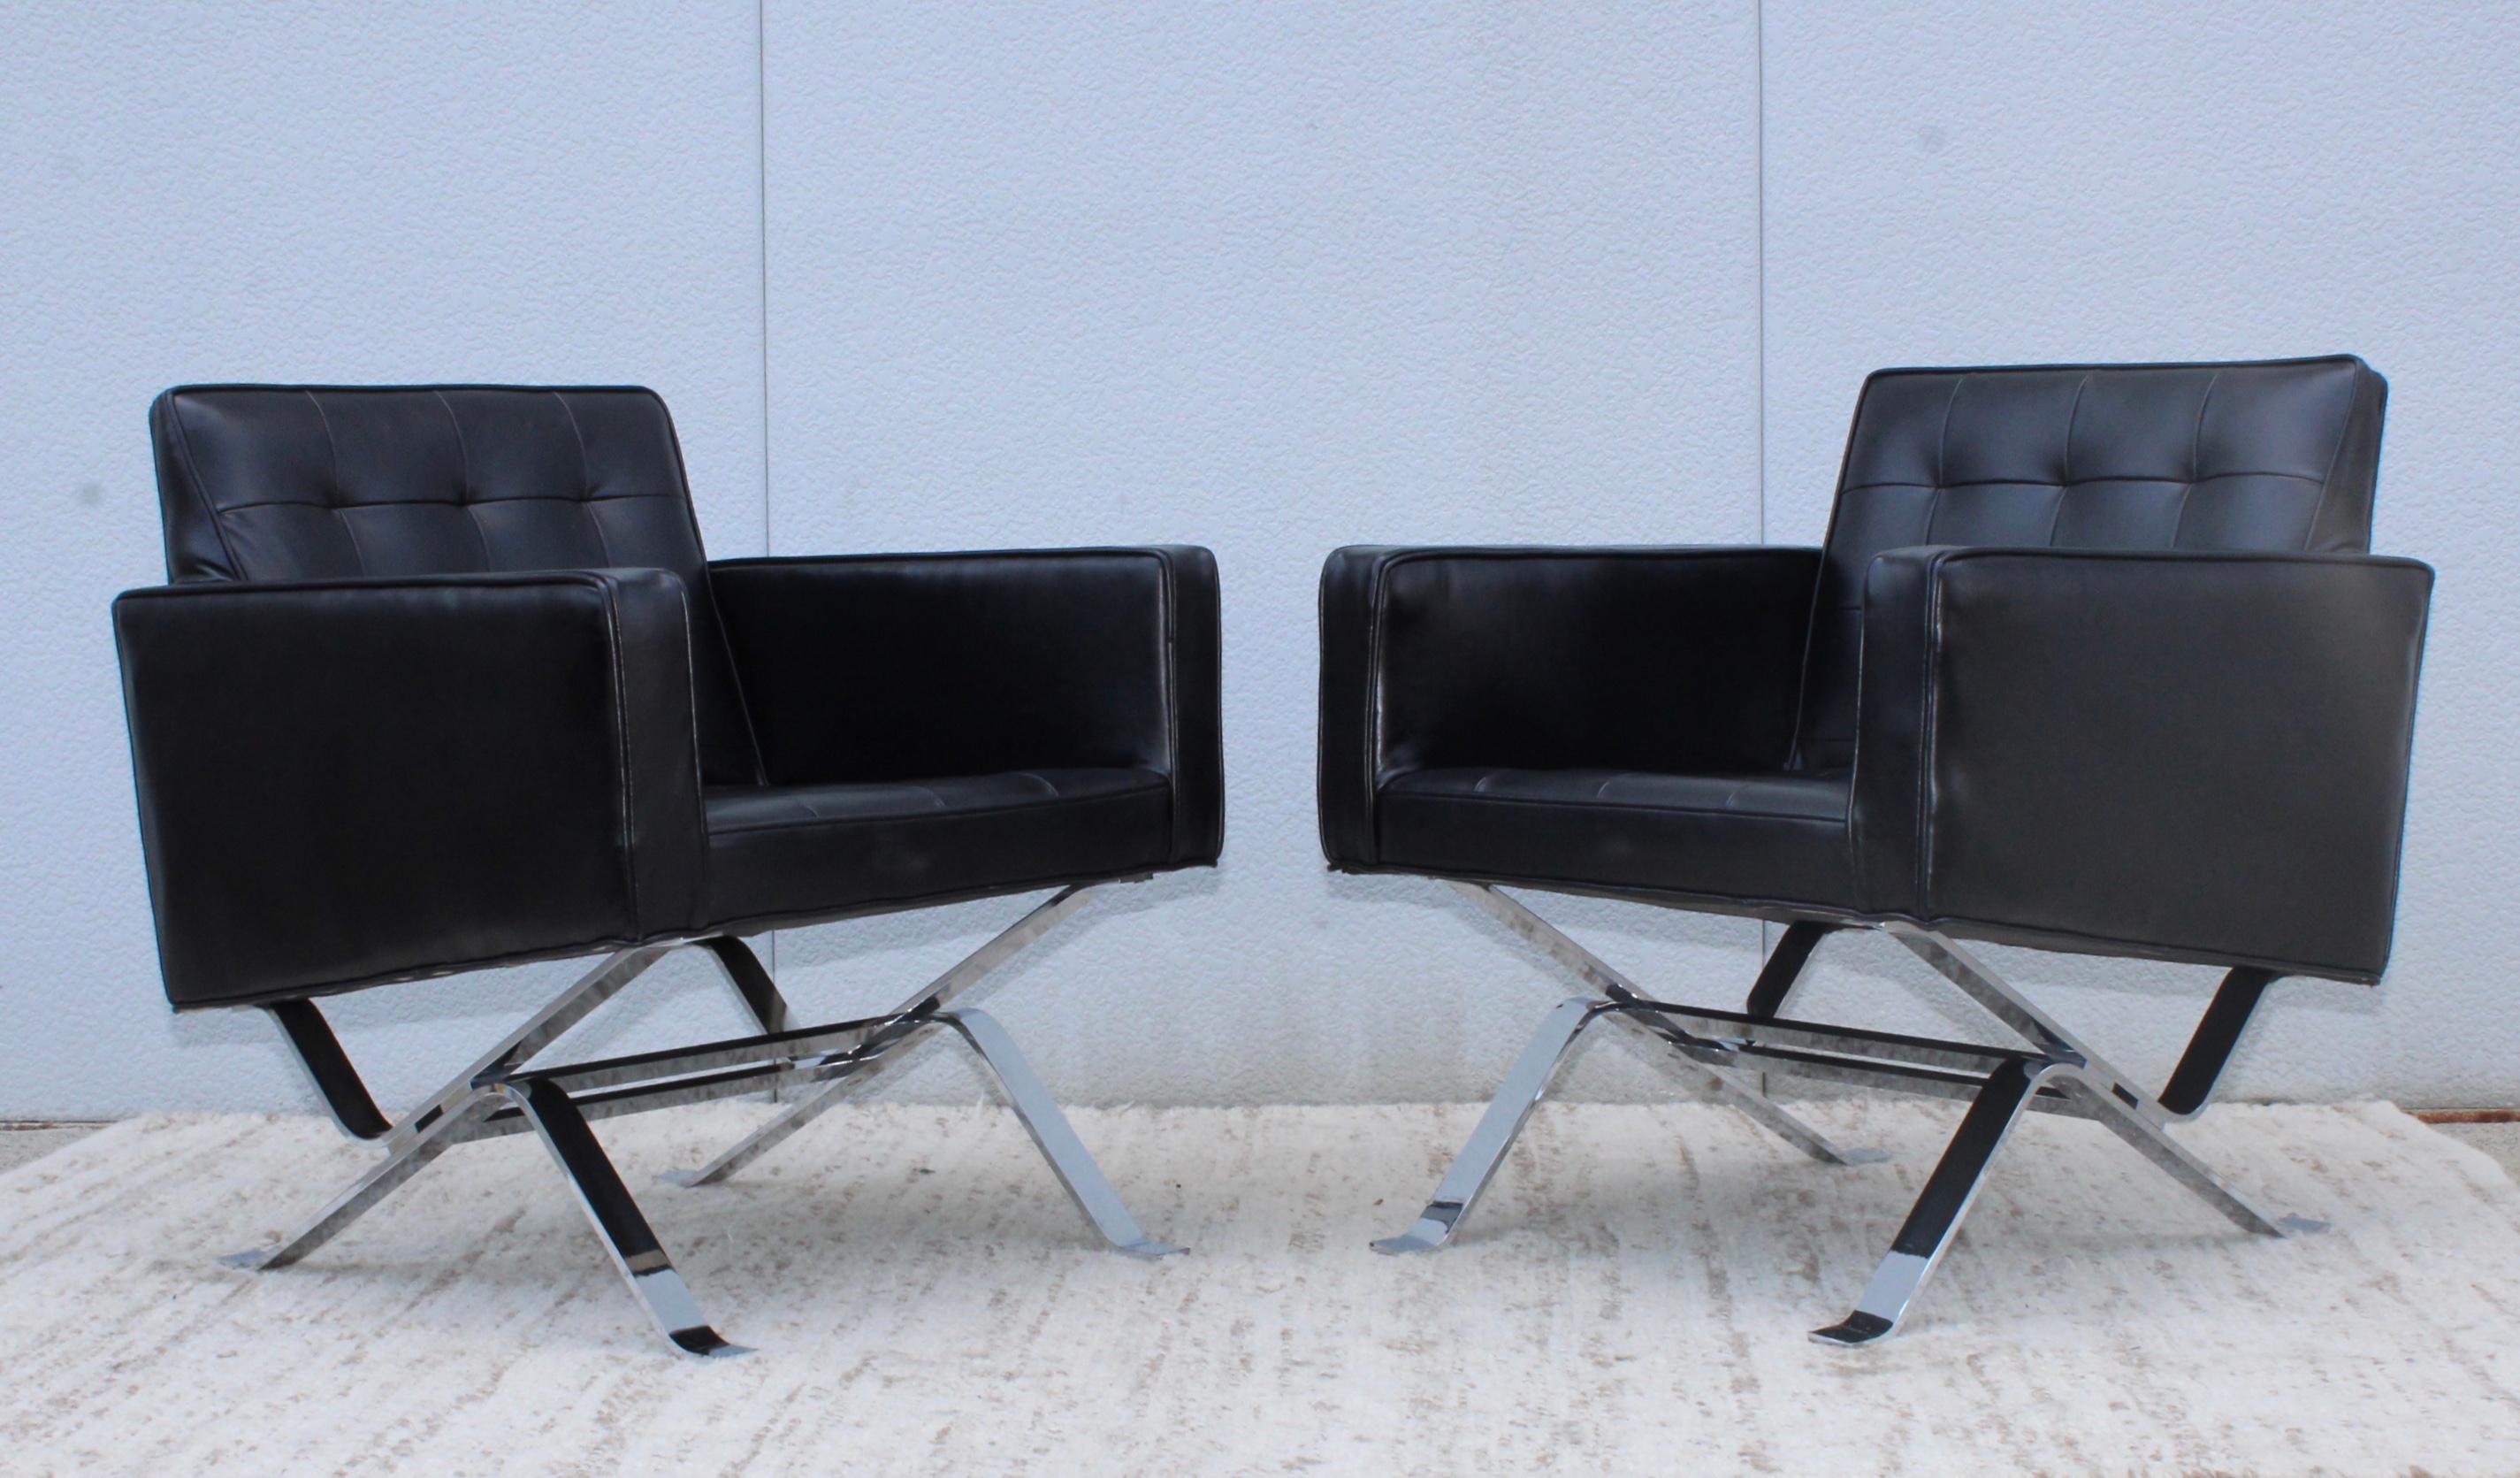 Stunning pair of 1960s chrome steel base with black leather upholstery lounge chairs by Robert Haussmann.